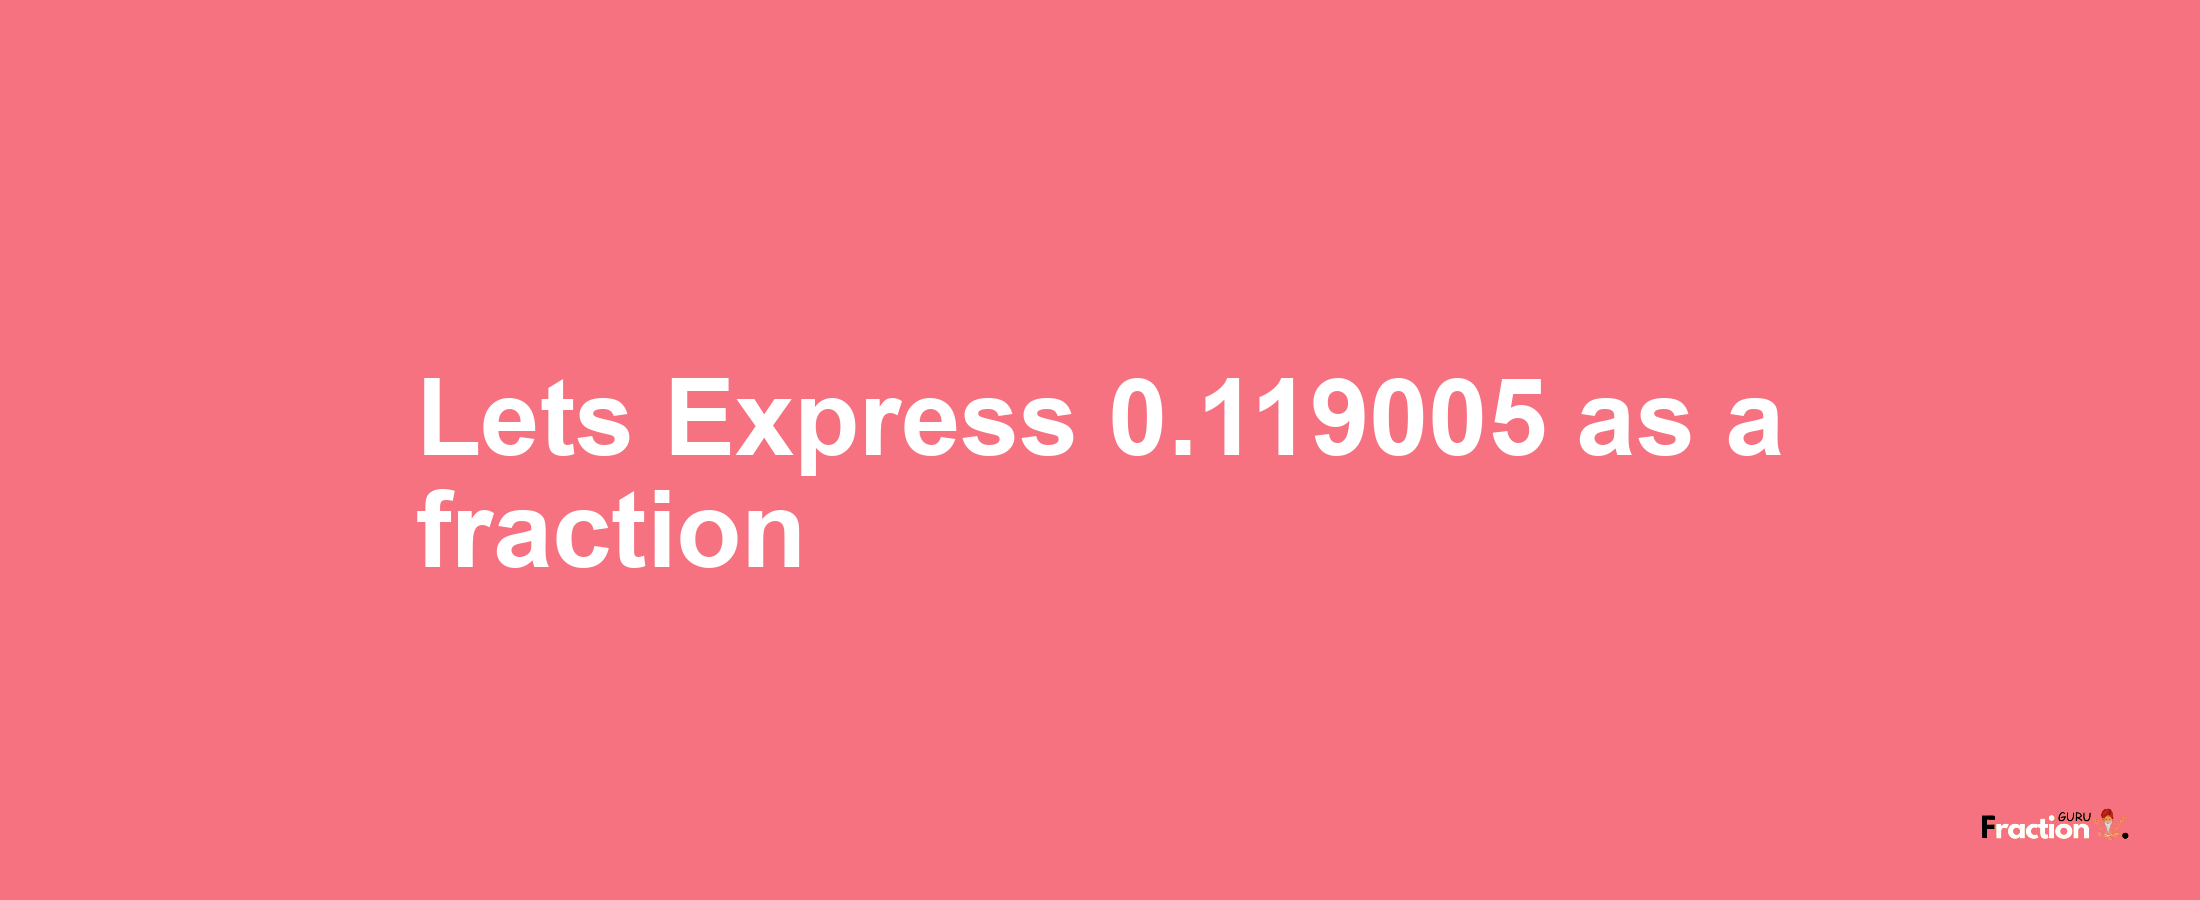 Lets Express 0.119005 as afraction